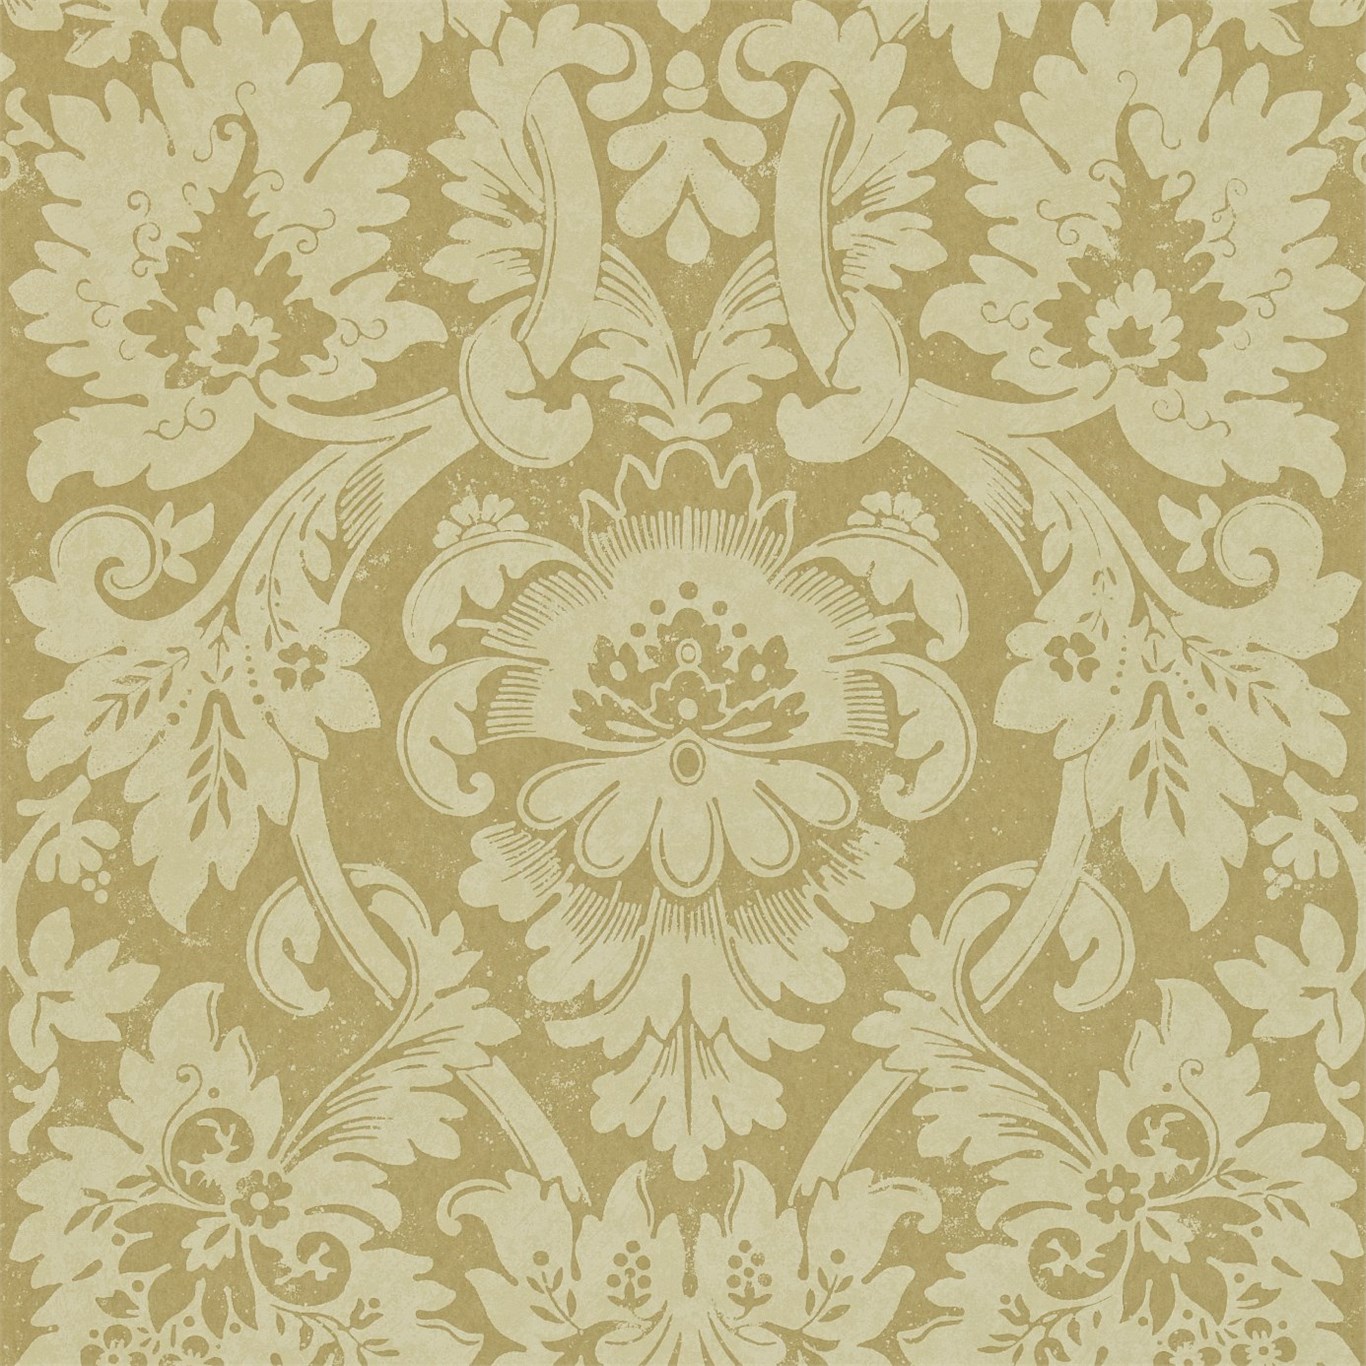 Luxury Fabric And Wallpaper Design Products British Uk